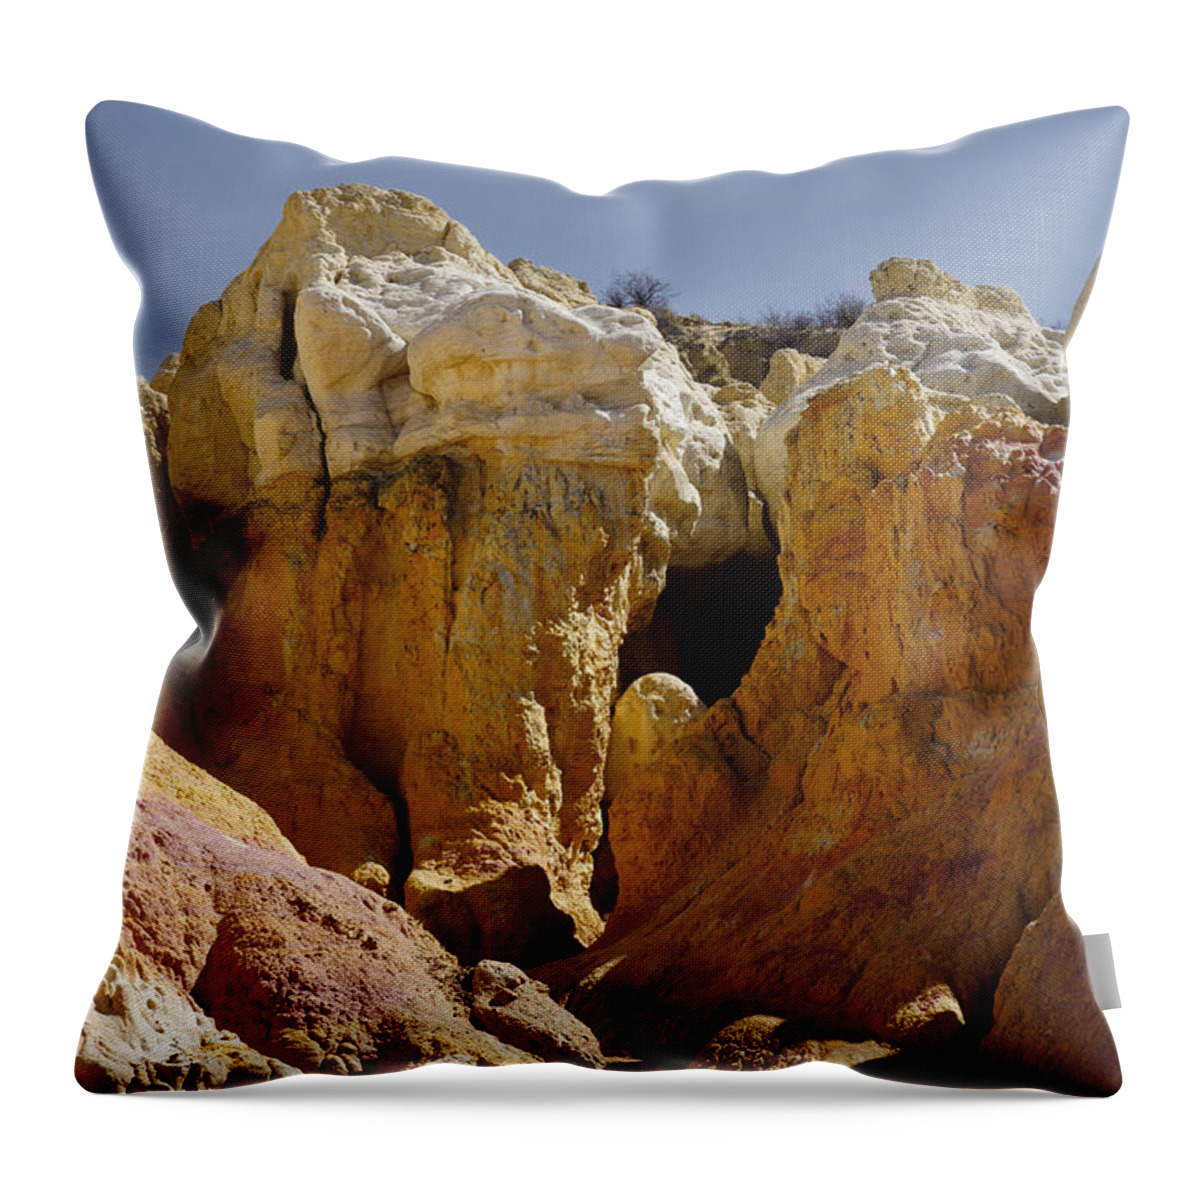 Calhan Paint Mines Throw Pillow featuring the photograph Calhan Paint Mines 1 by Ernest Echols